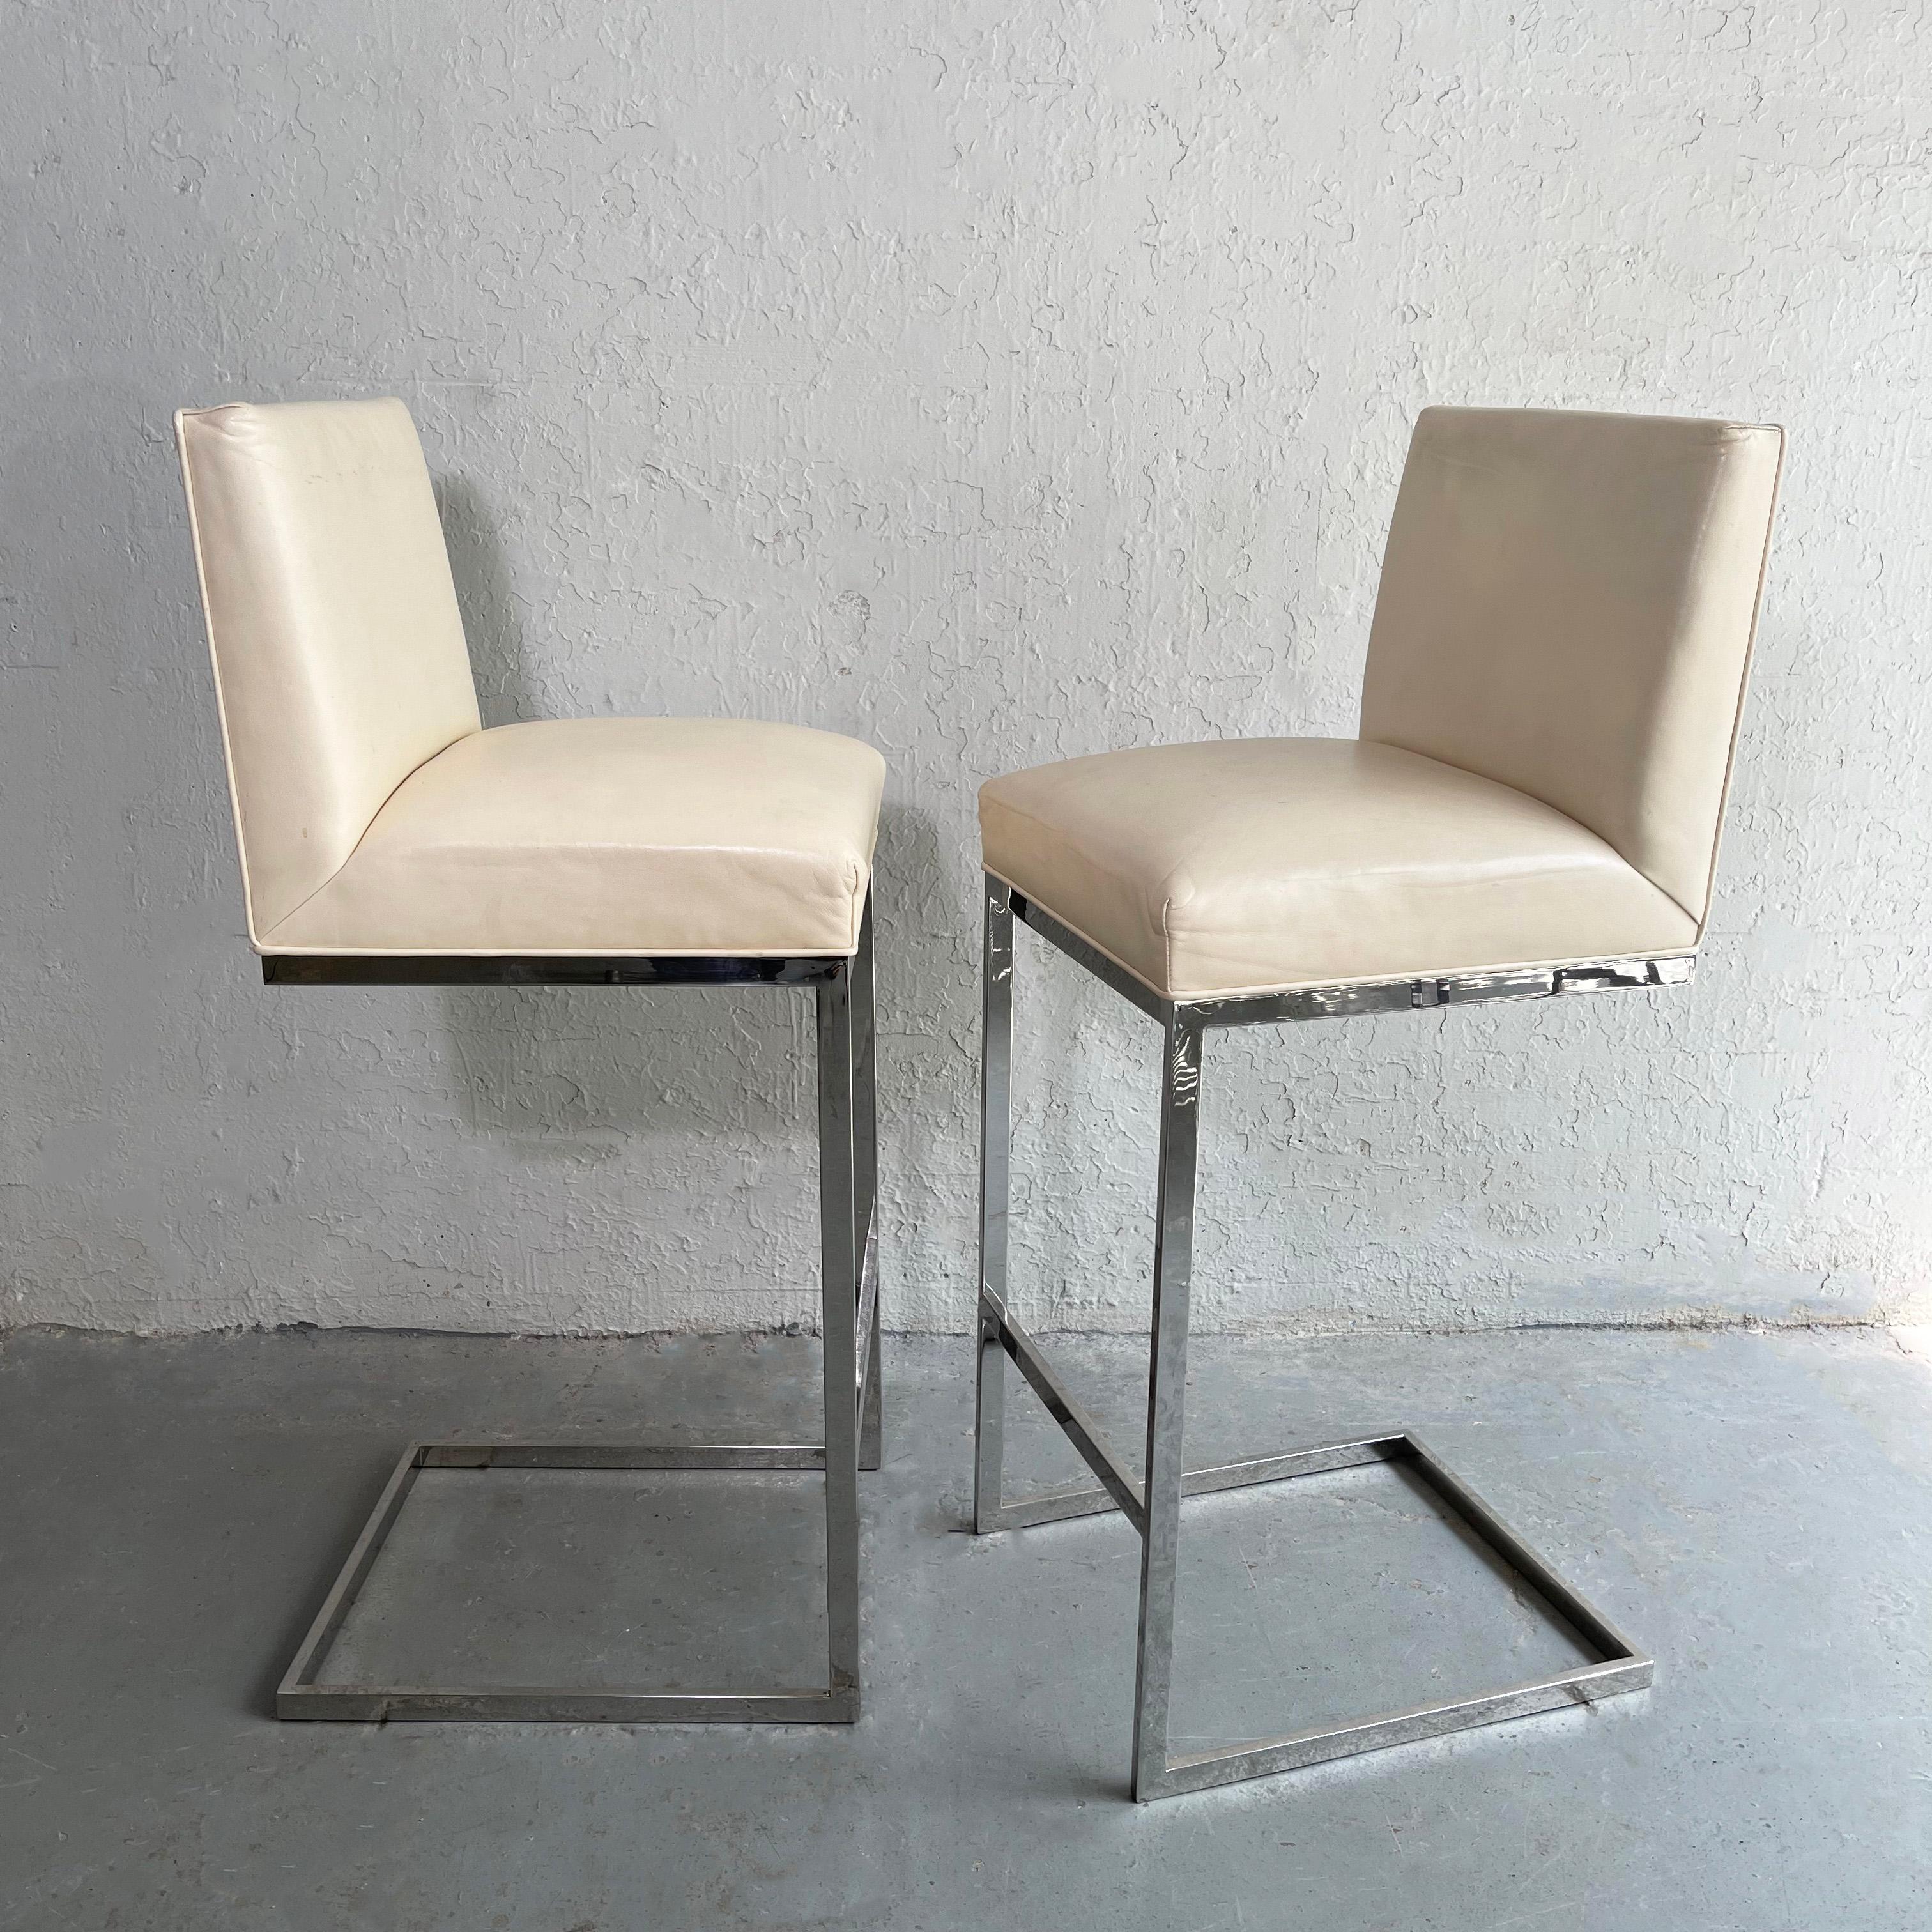 Post-Modern Minimal Leather Chrome Cantilever Bar Stools For Sale